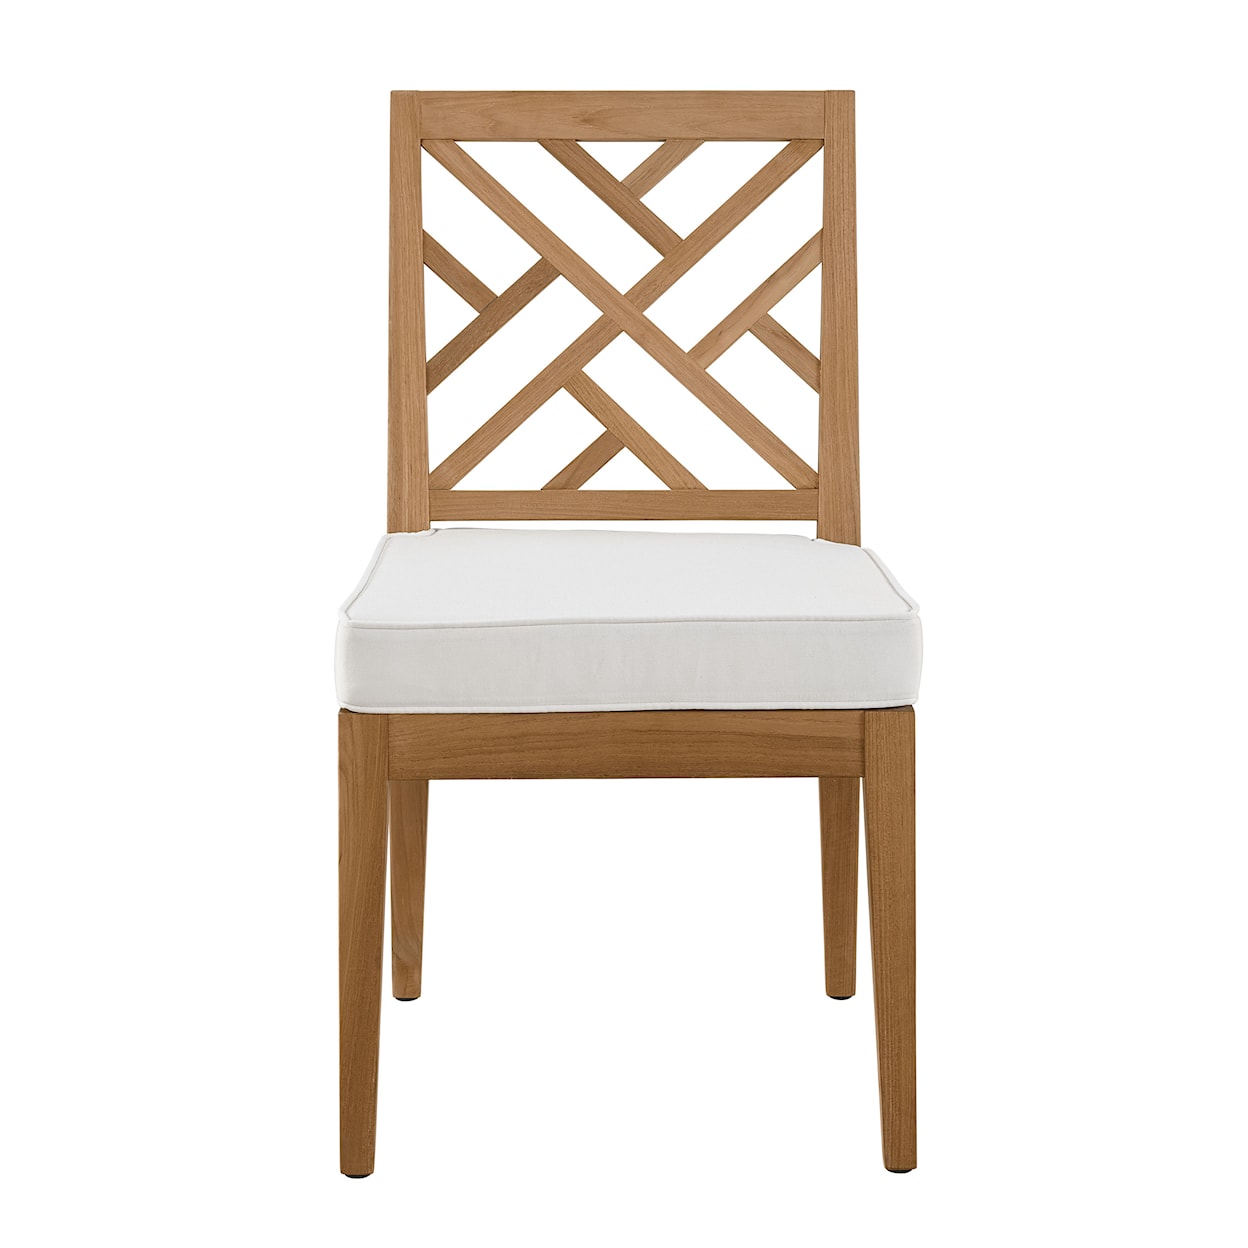 Universal Coastal Living Outdoor Outdoor Chesapeake Side Chair